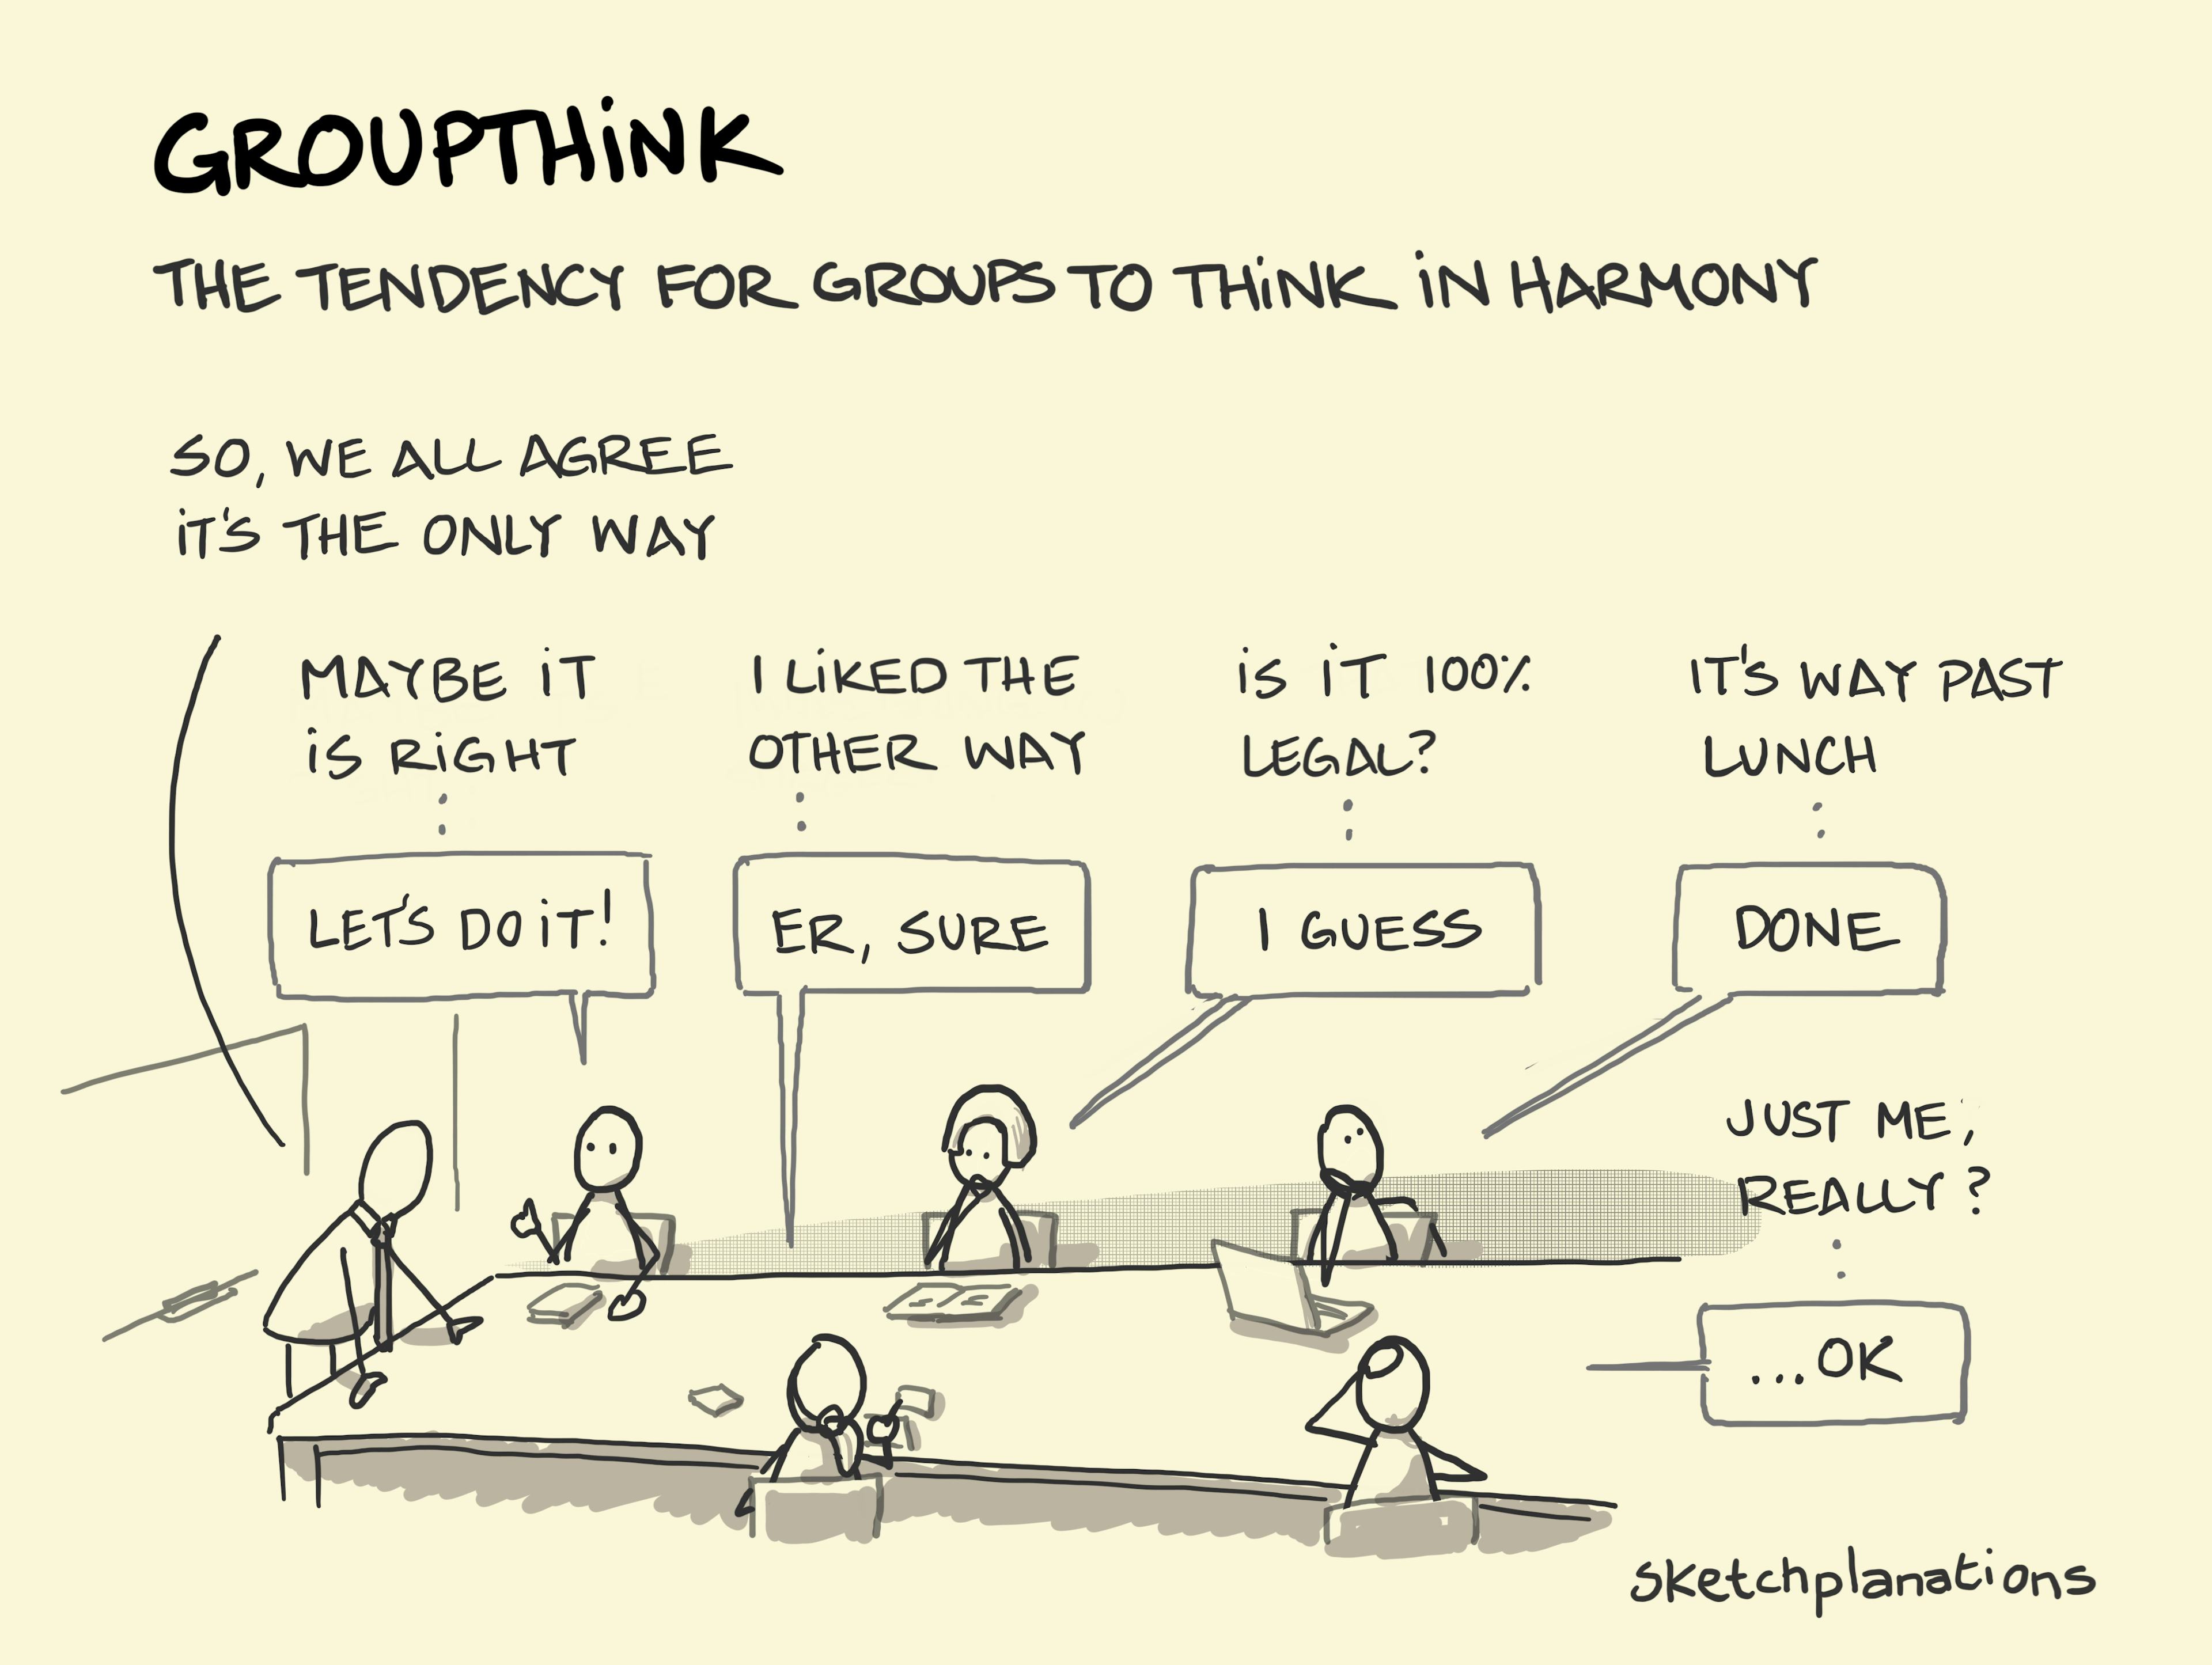 Groupthink: People acquiescing to the manager's and what they see as others' views during a meeting